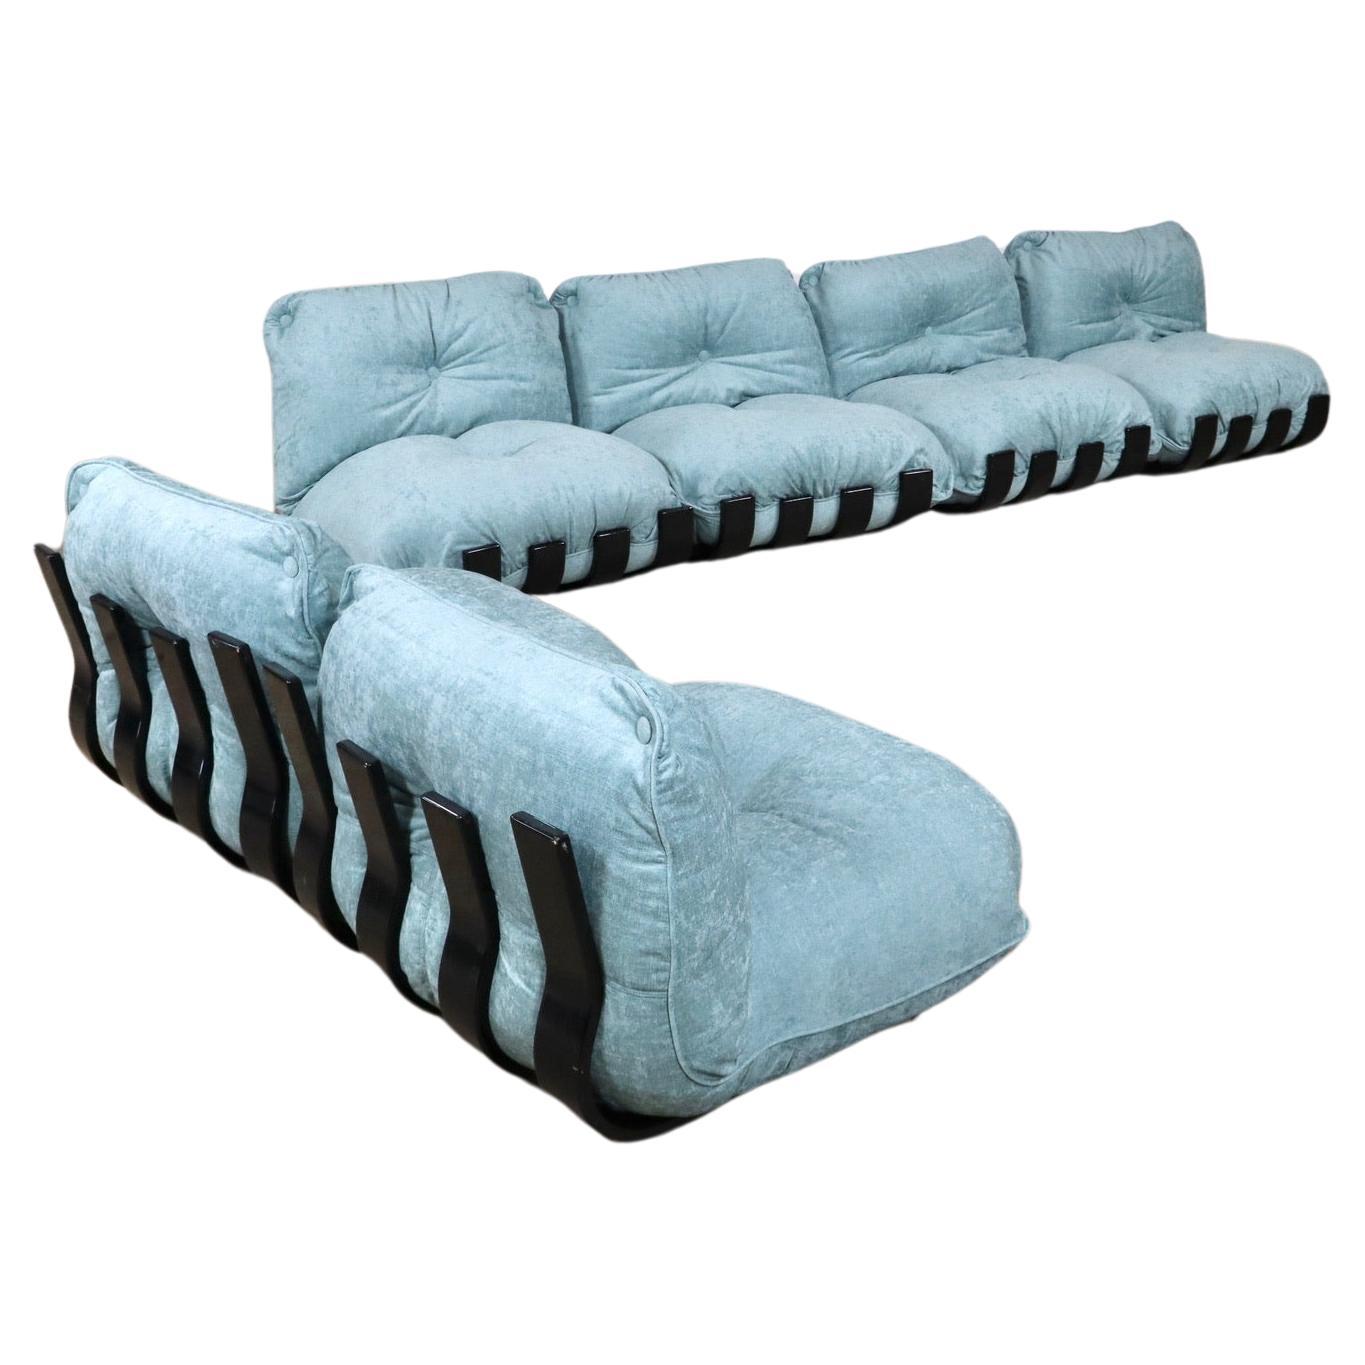 Sectional Gran Visir Sofa in Blue Velvet by Luciano Frigerio, Italy, 1970s For Sale